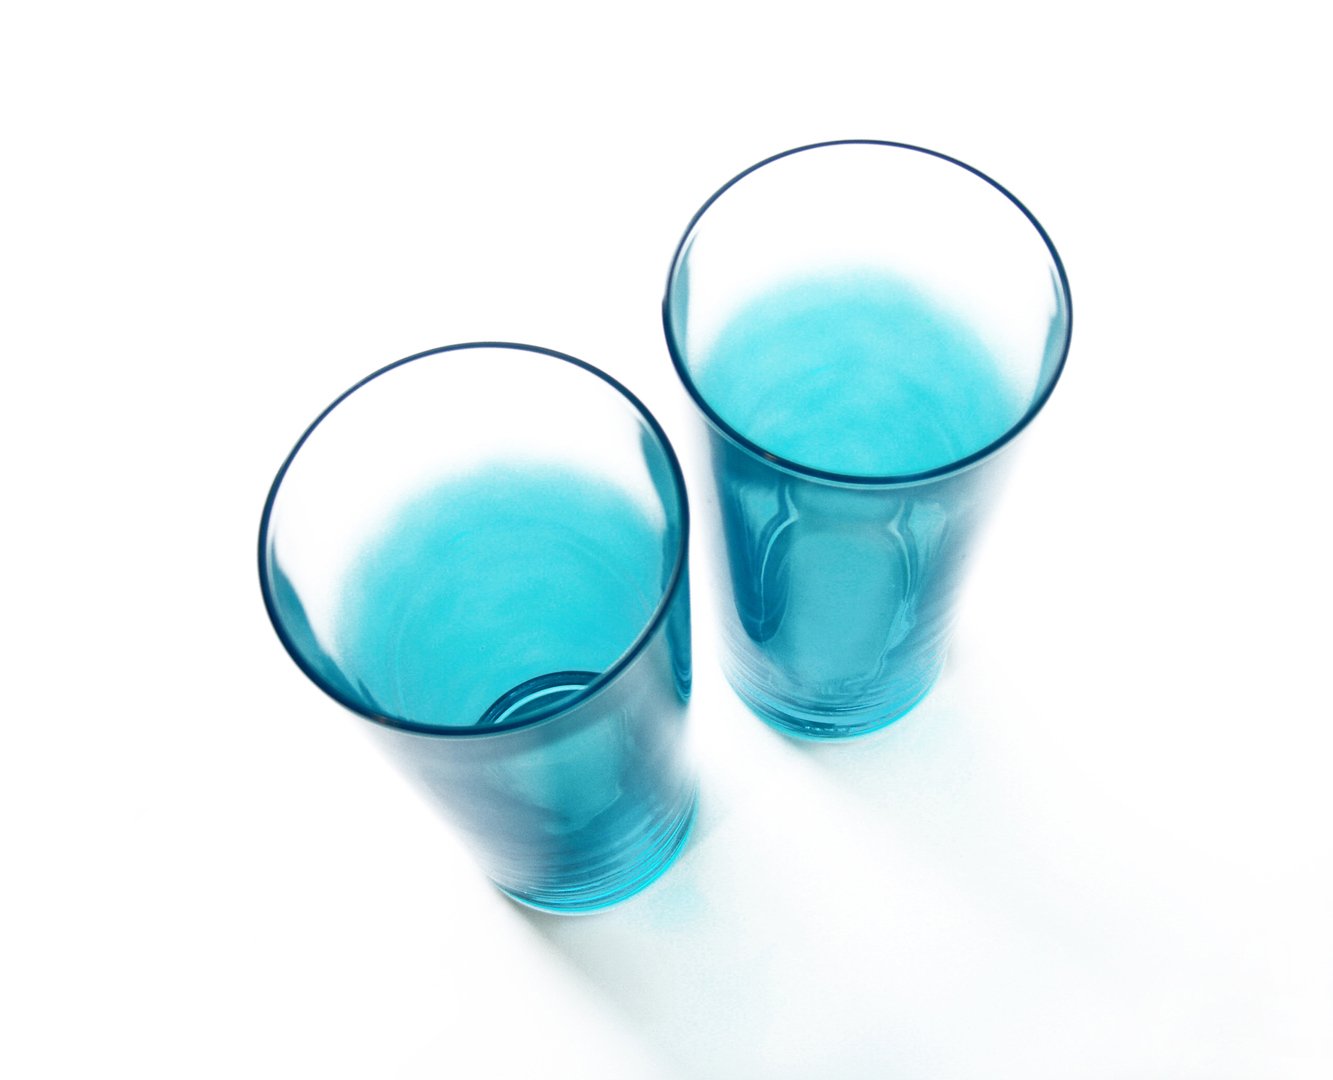 there are two glasses filled with blue liquid